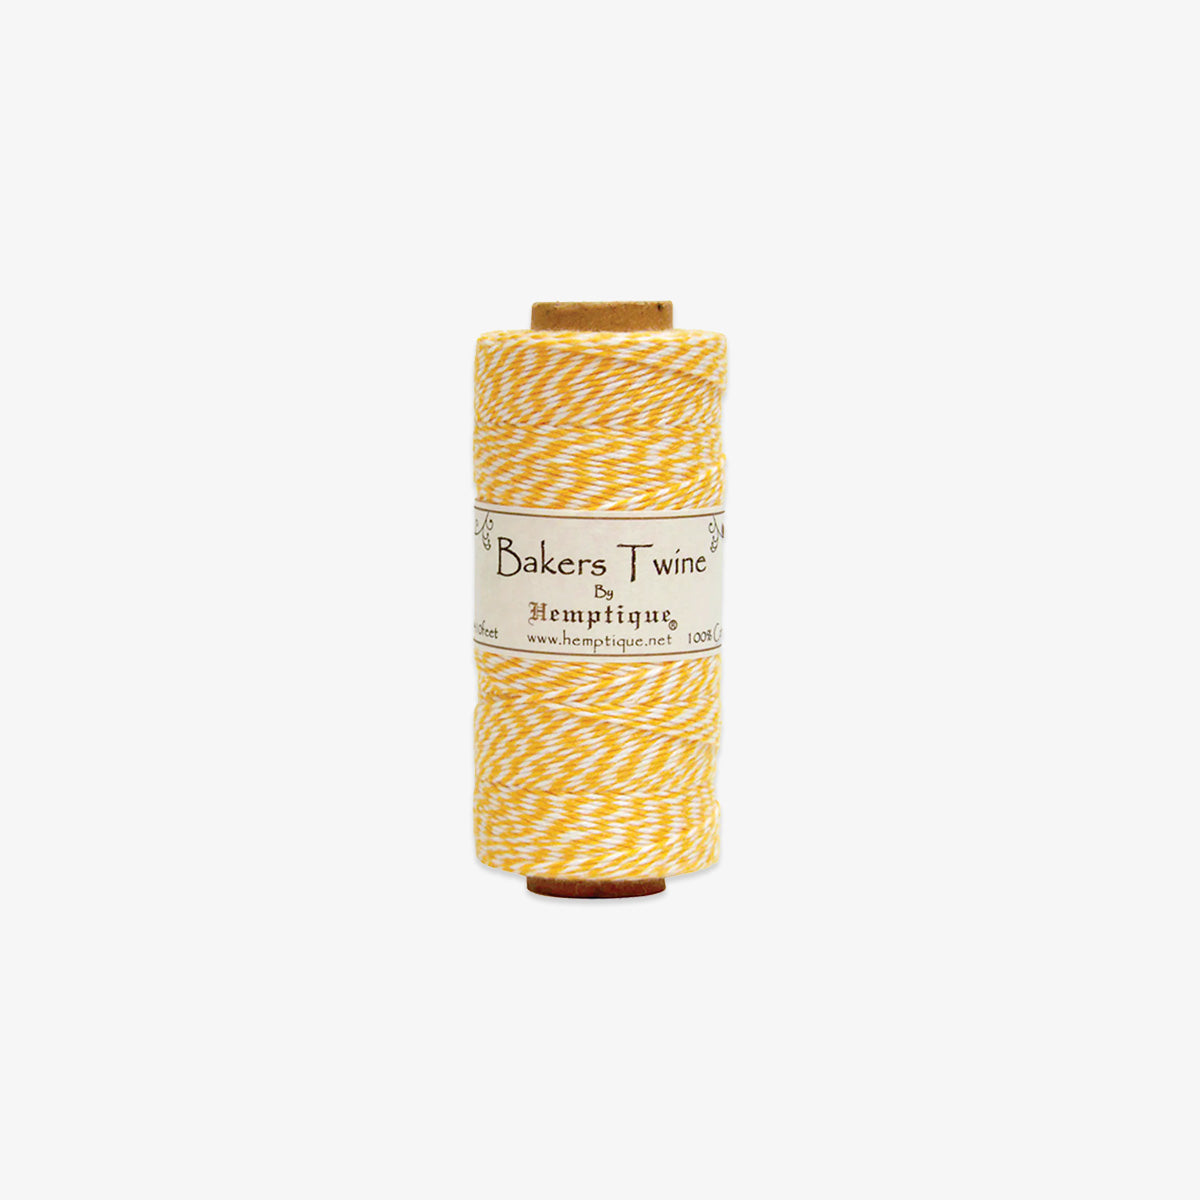 BAKERS TWINE // YELLOW & WHITE